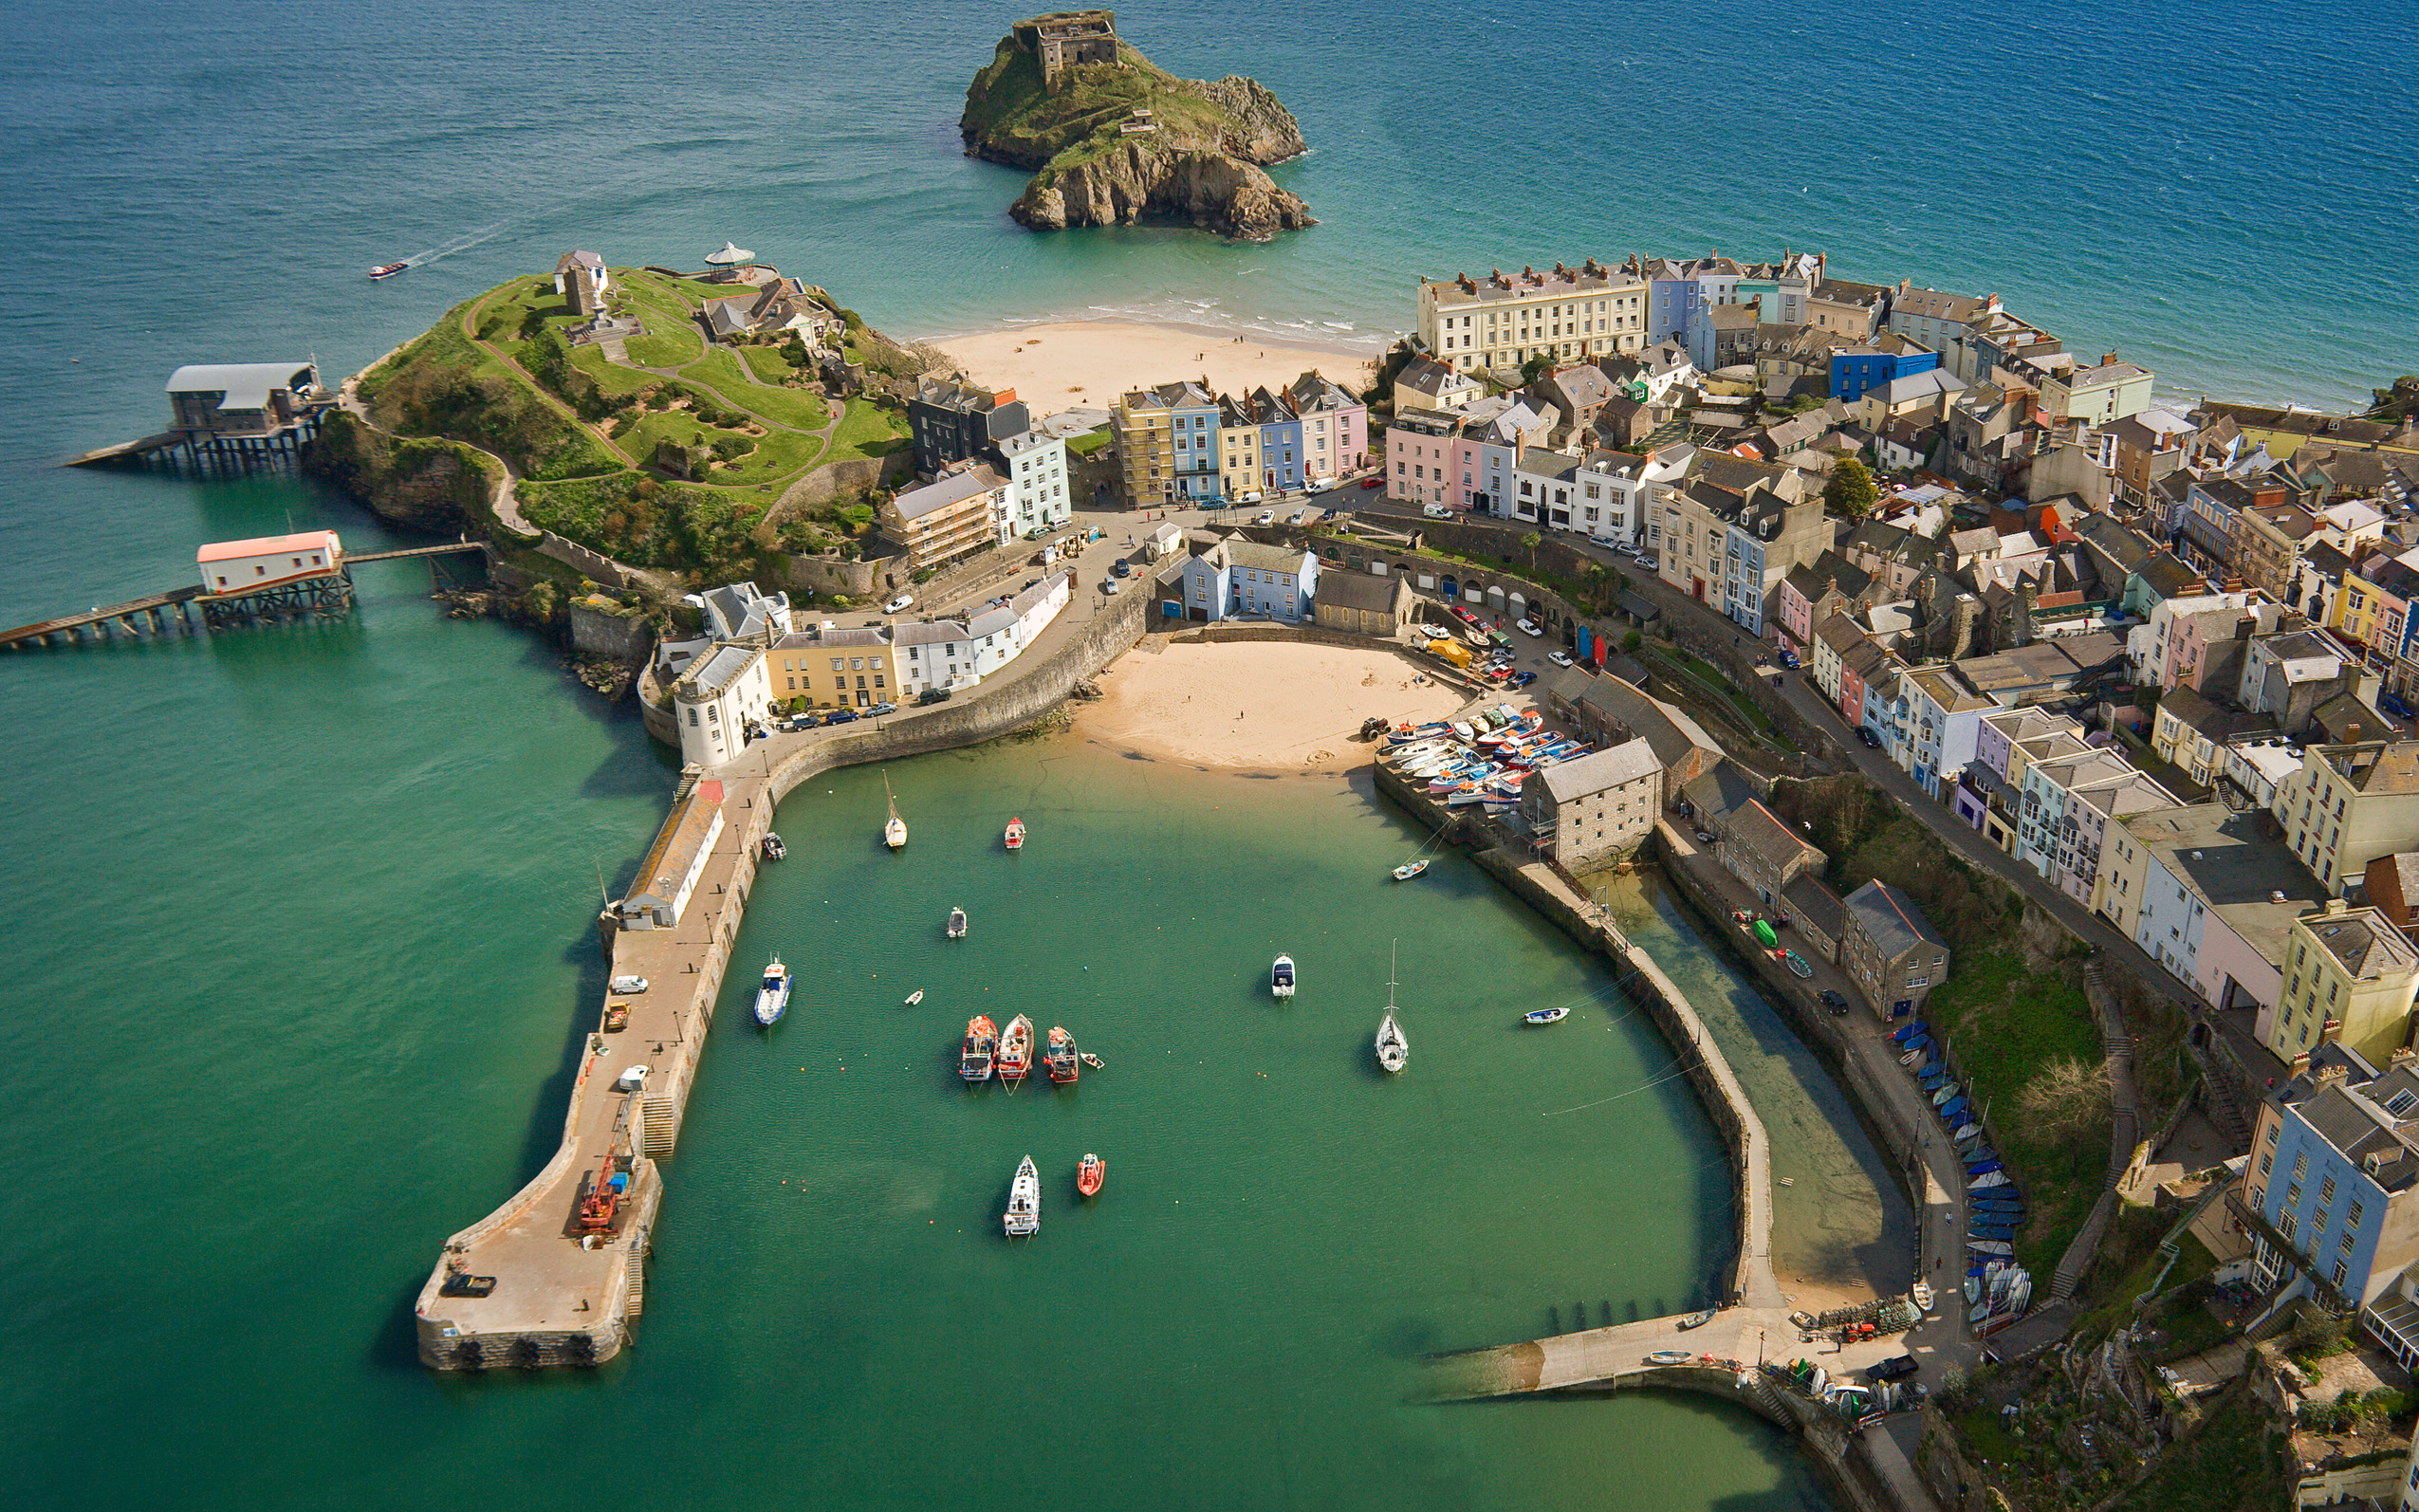 Where in Wales is Tenby?